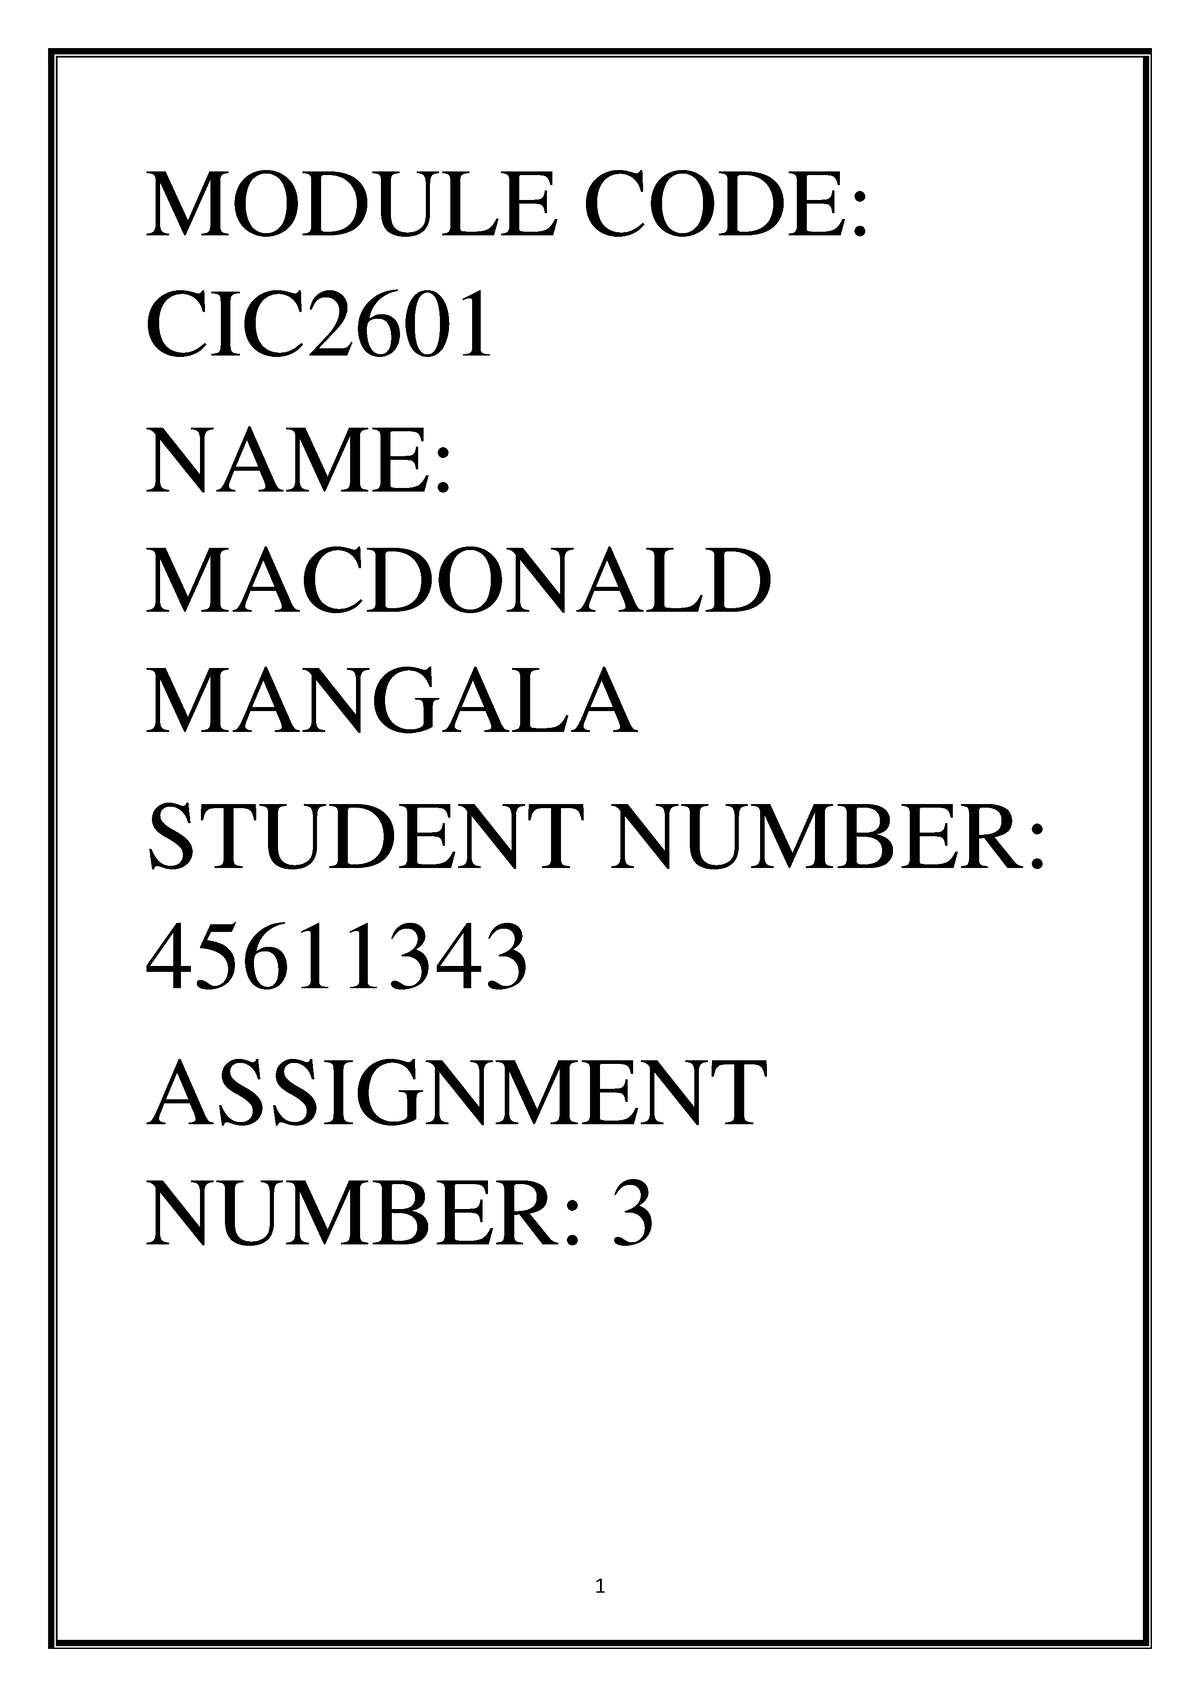 cic2601 assignment 3 answers